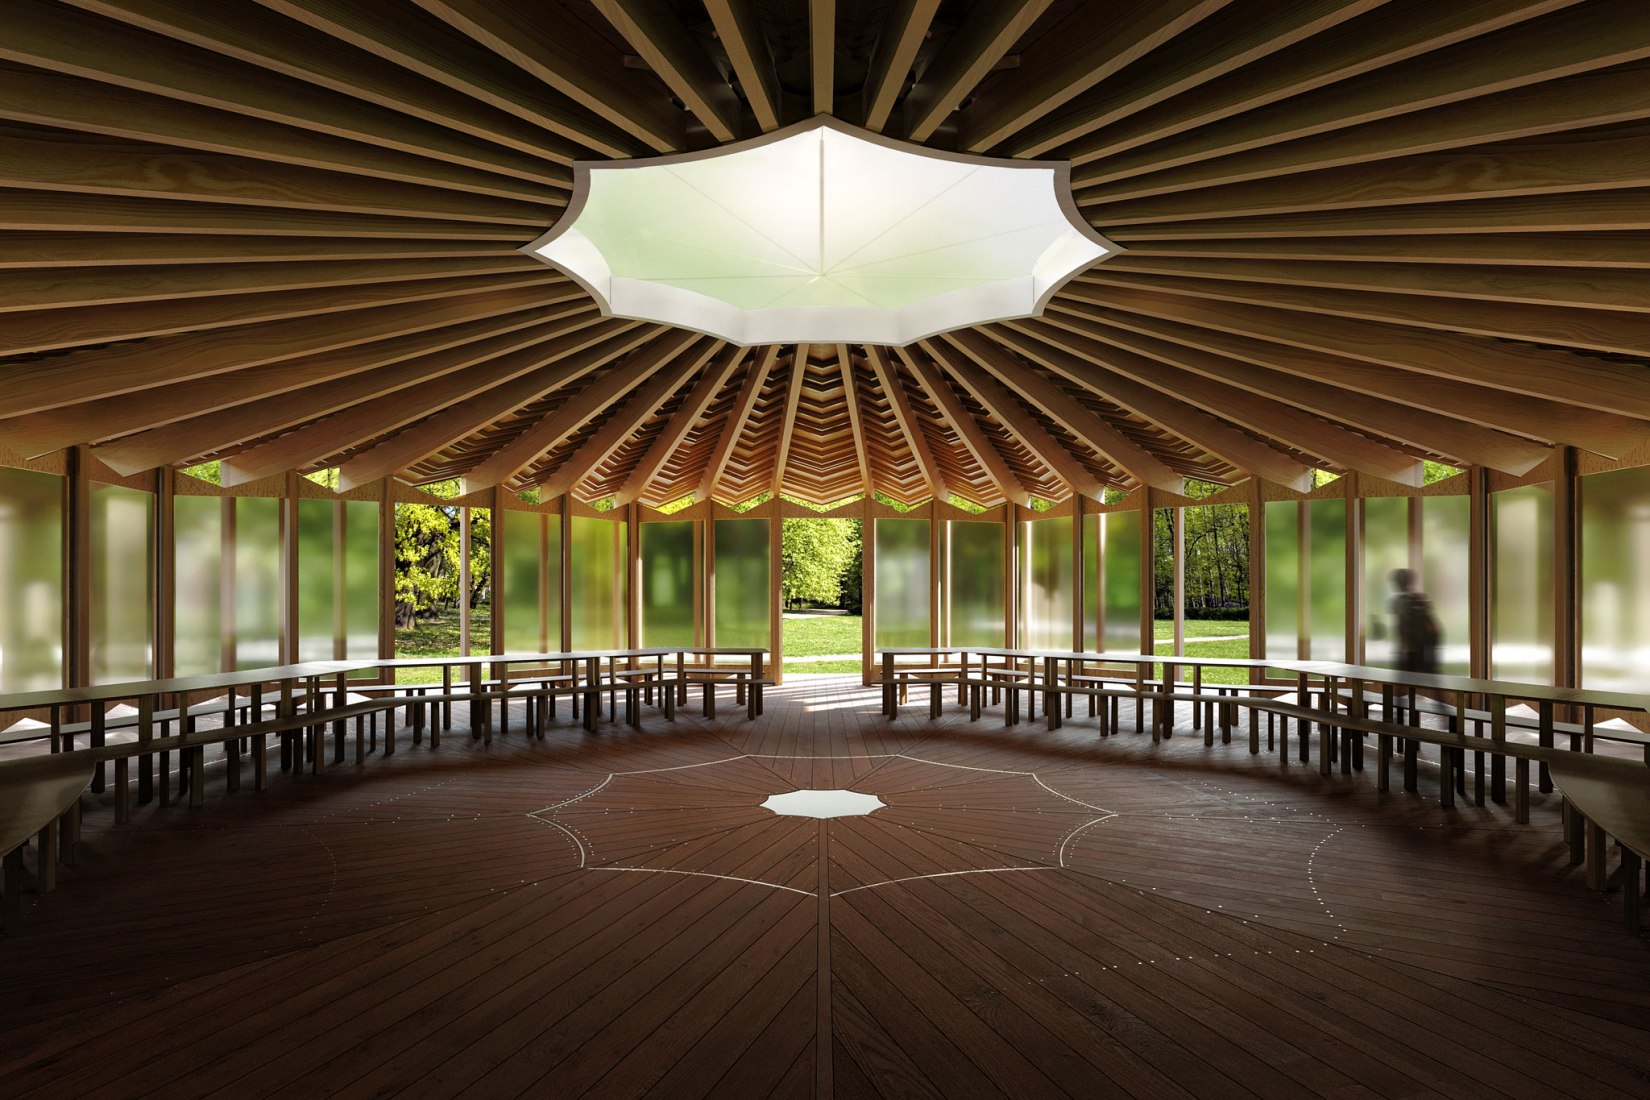 Interior view. Serpentine Pavilion 2023 designed by Lina Ghotmeh. Rendering by Lina Ghotmeh. Image courtesy by Serpentine